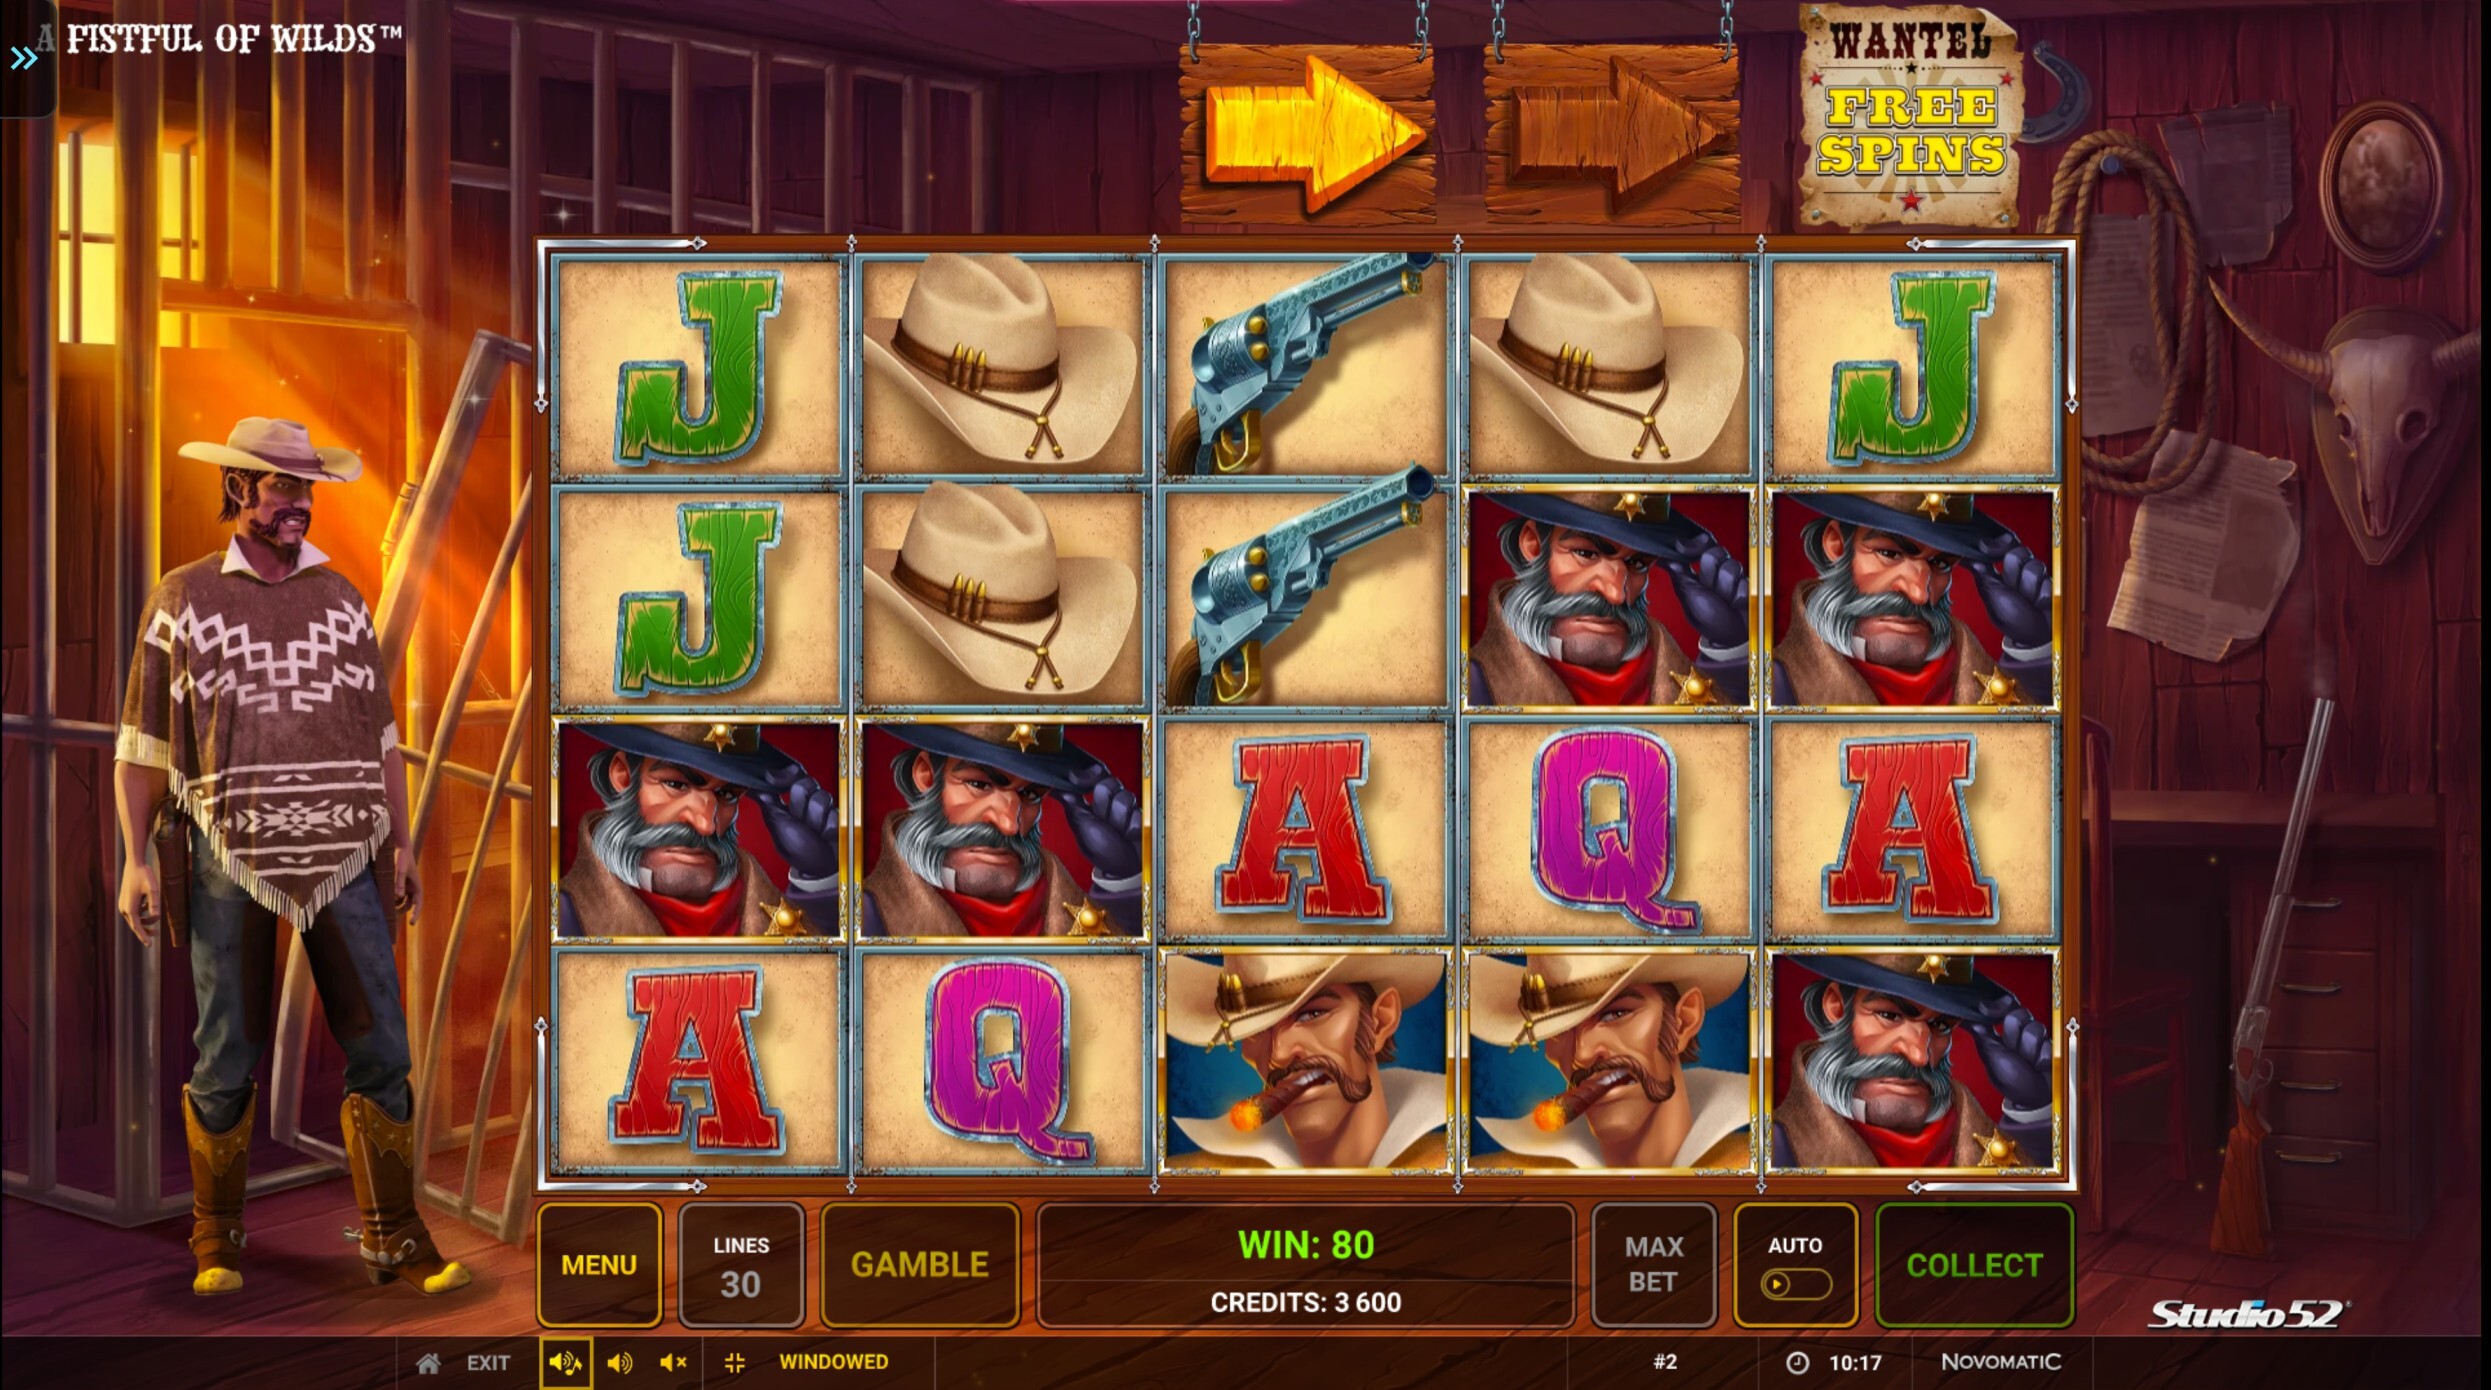 A Fistful of Wilds Slot Gameplay